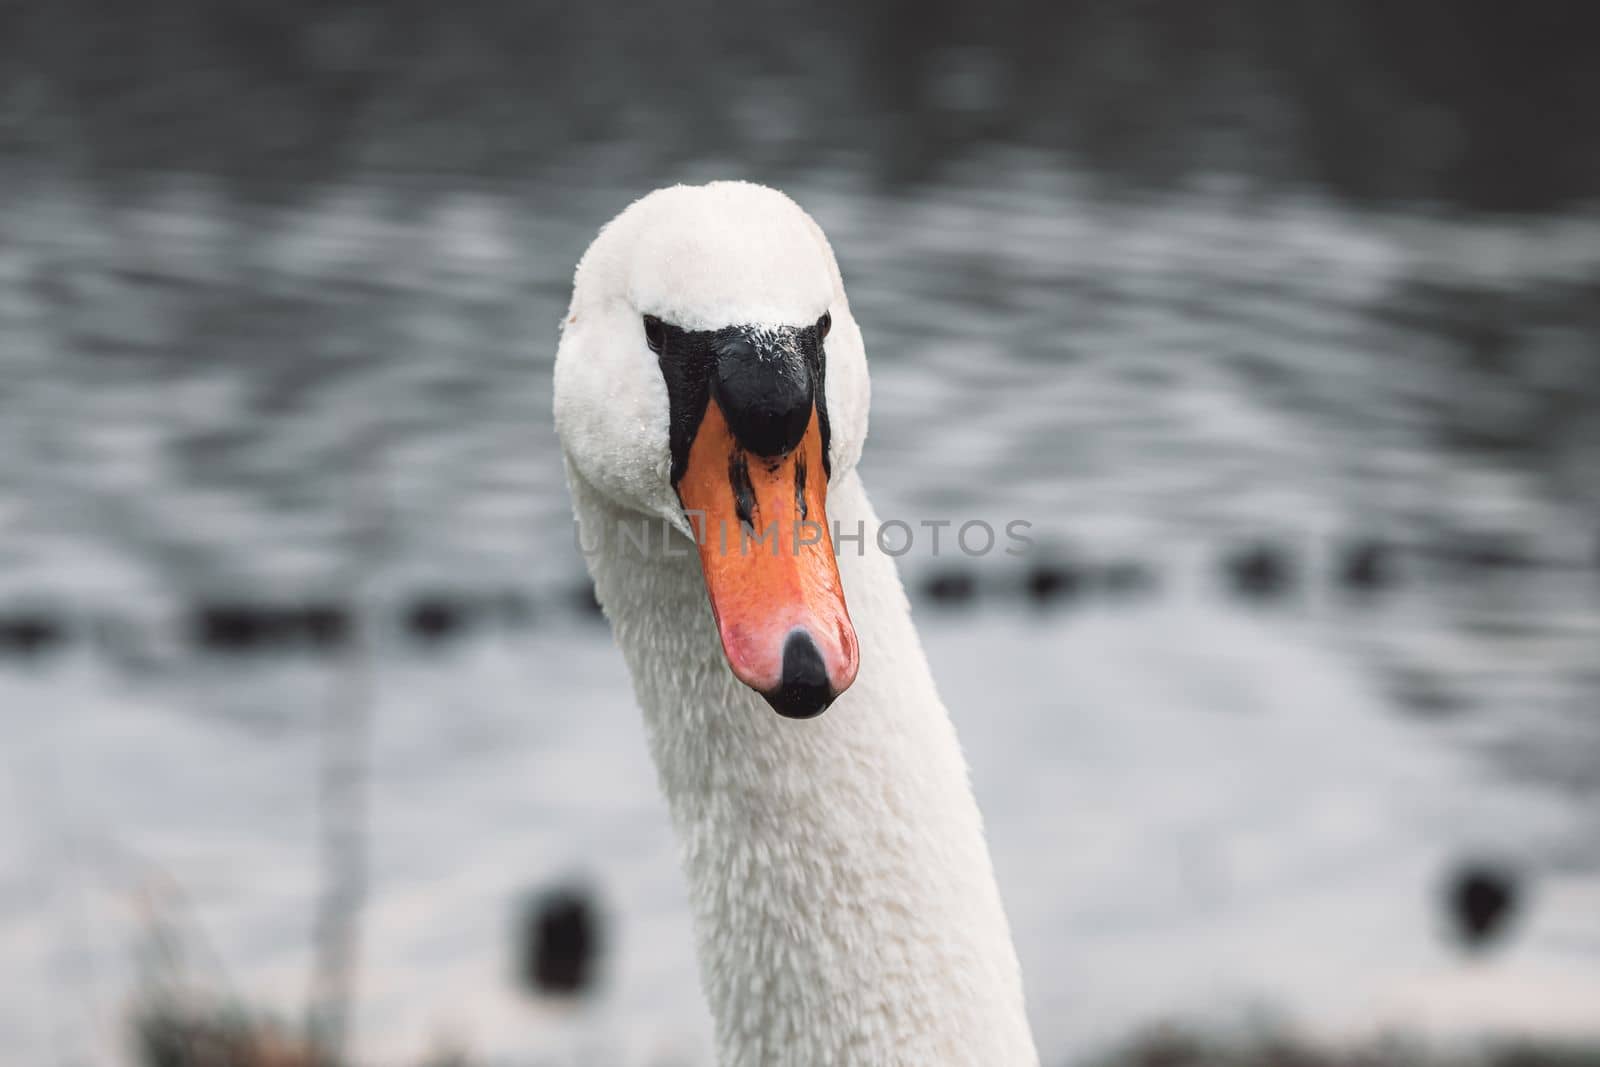 Beautiful white swan. Close up at swan face. White swan swimming in pond.